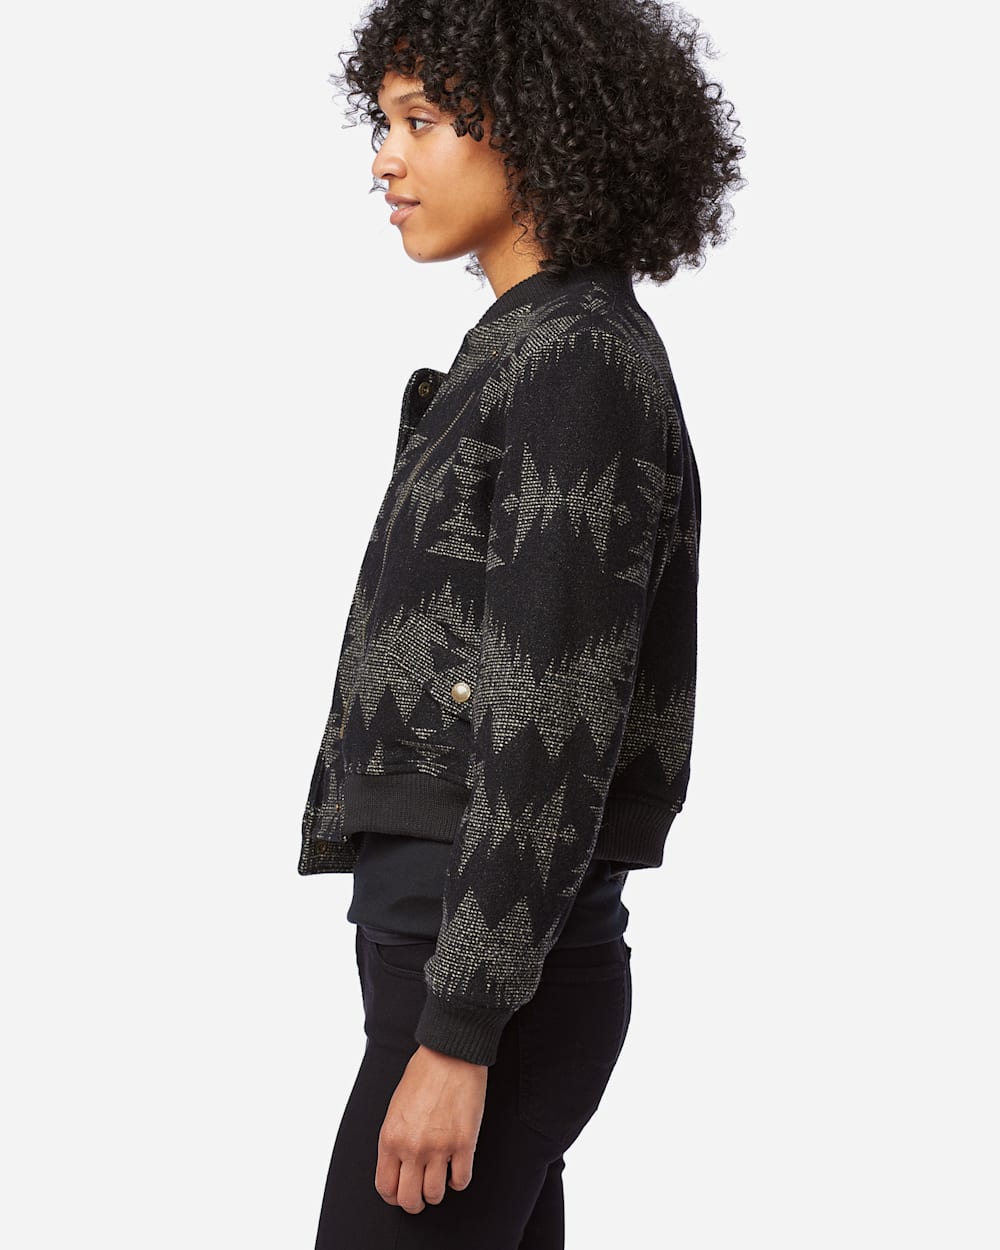 ALTERNATE VIEW OF WOMEN'S JACQUARD BOMBER JACKET IN BLACK SONORA image number 3